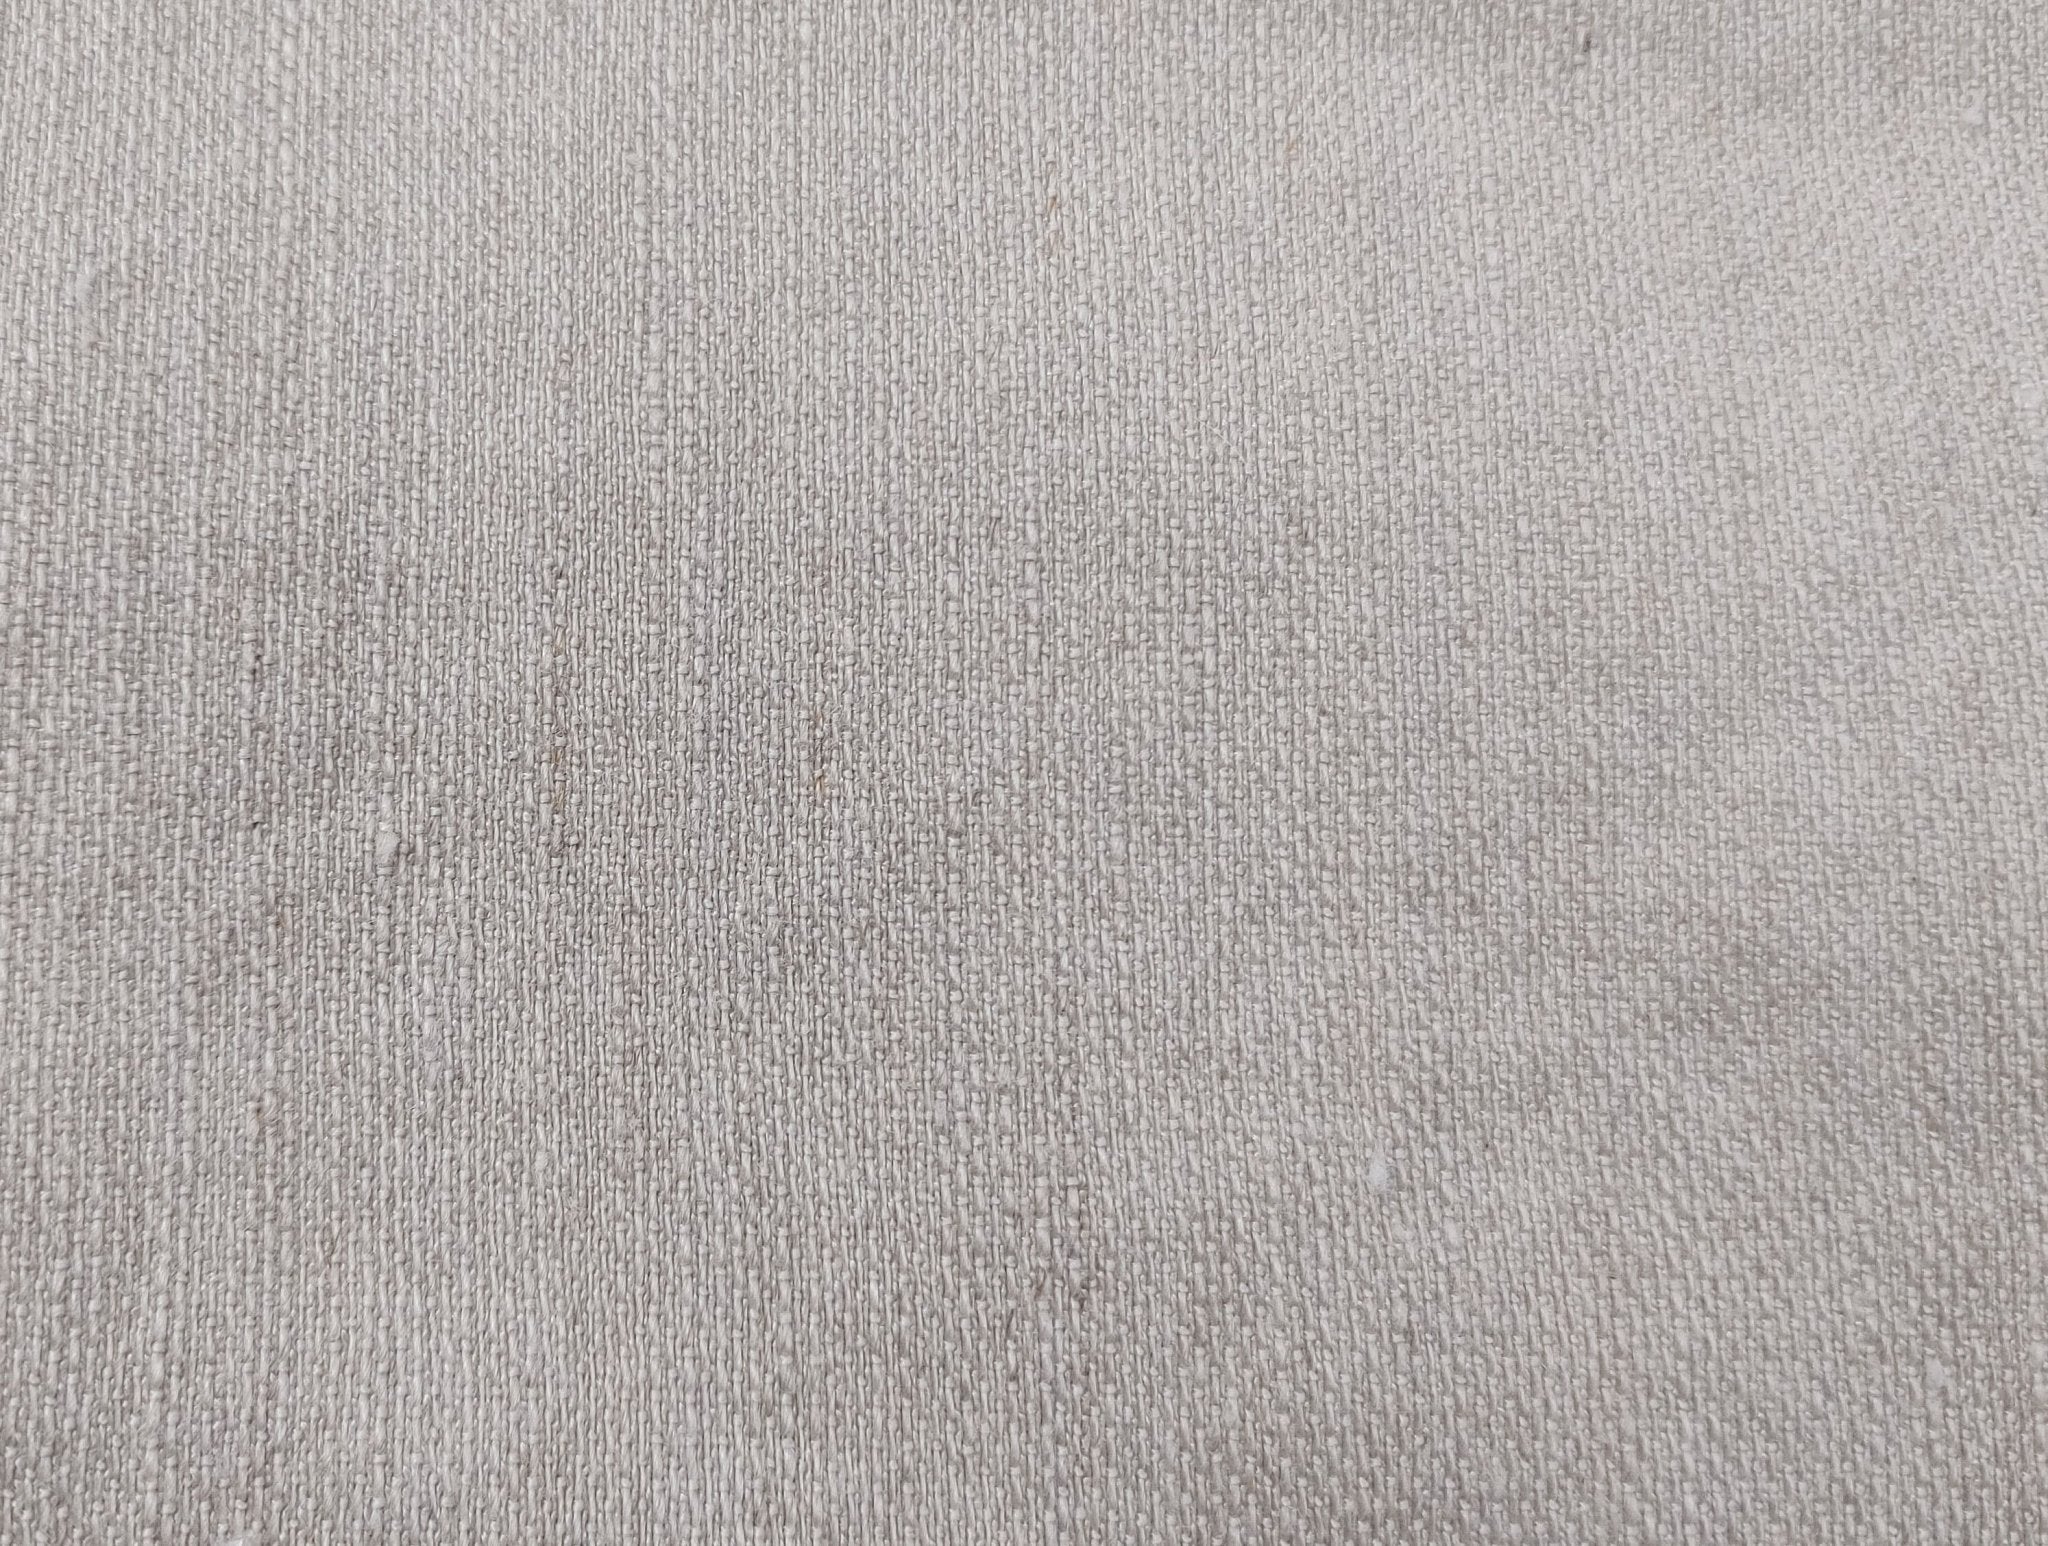 Linen Rayon PU Stretch Dobby Weave Fabric 6643 6644 - The Linen Lab - White